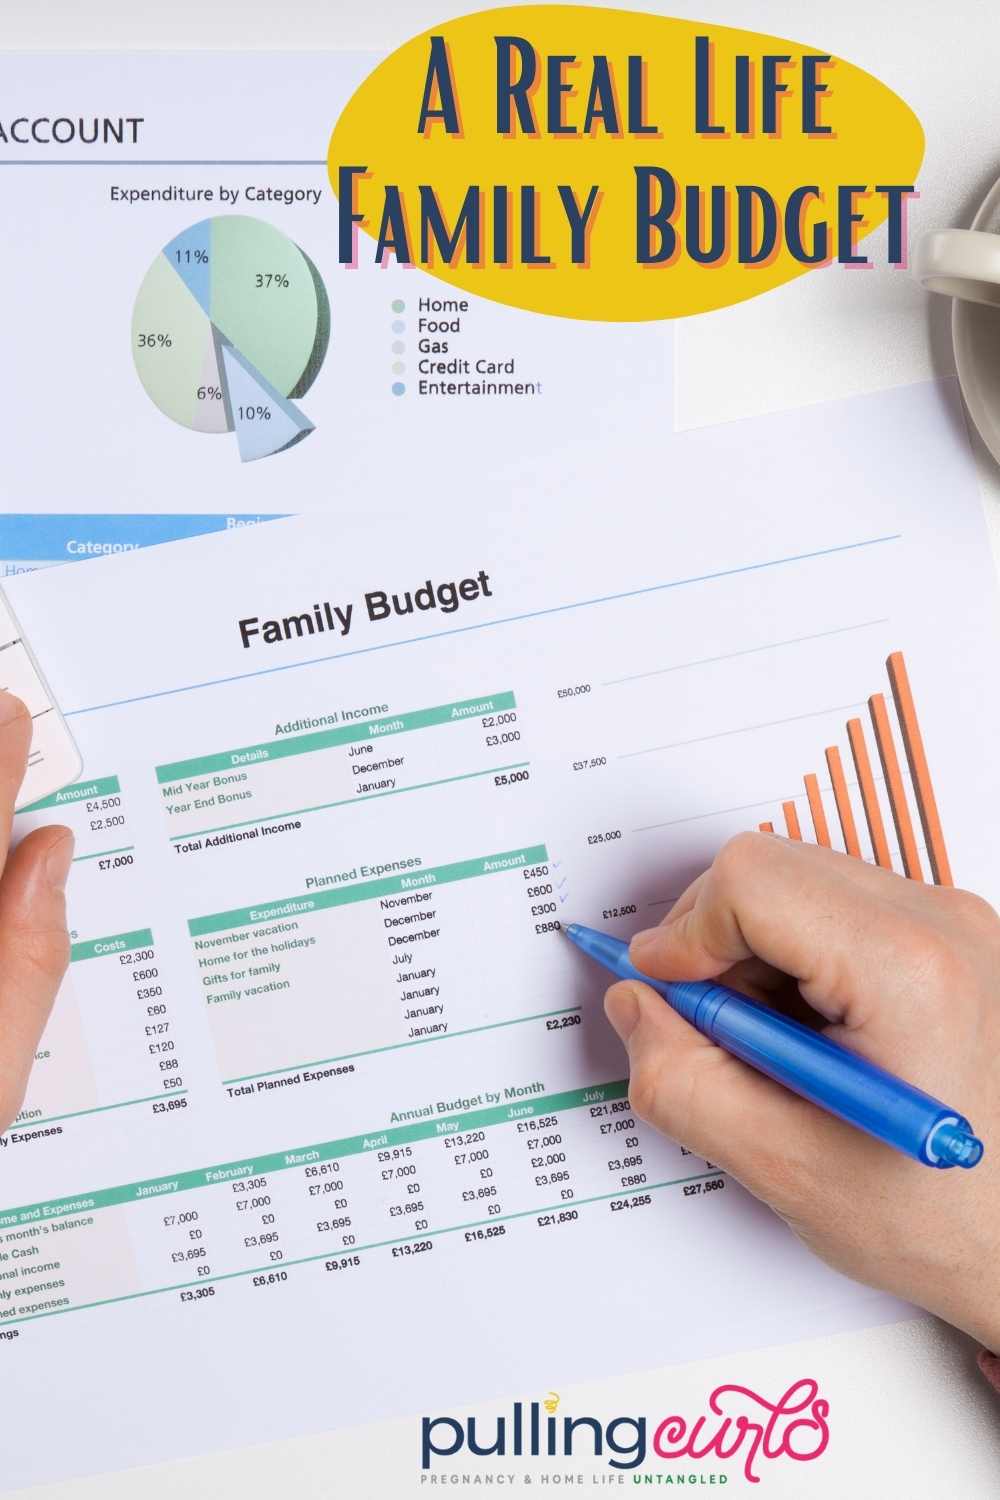 This is our REAL budget -- the actual numbers, and the actual totals we need to sustain our life. is it similar to yours? Come find out! #budget #budgets #finances via @pullingcurls